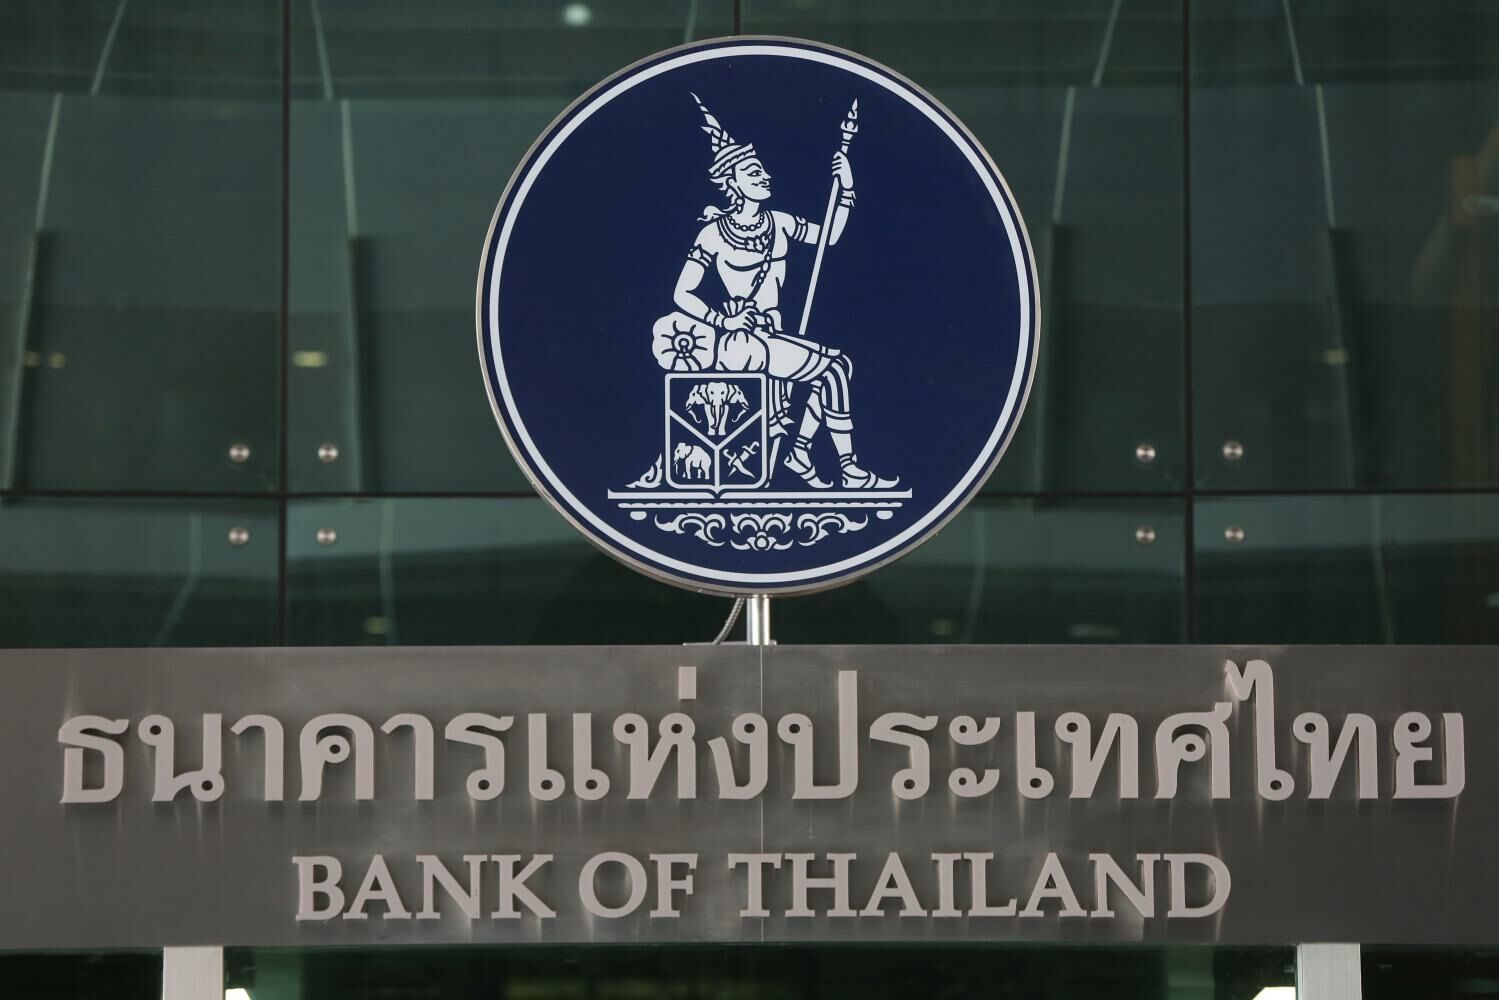 Thailand’s central bank bans prepayment charges in new lending regulation